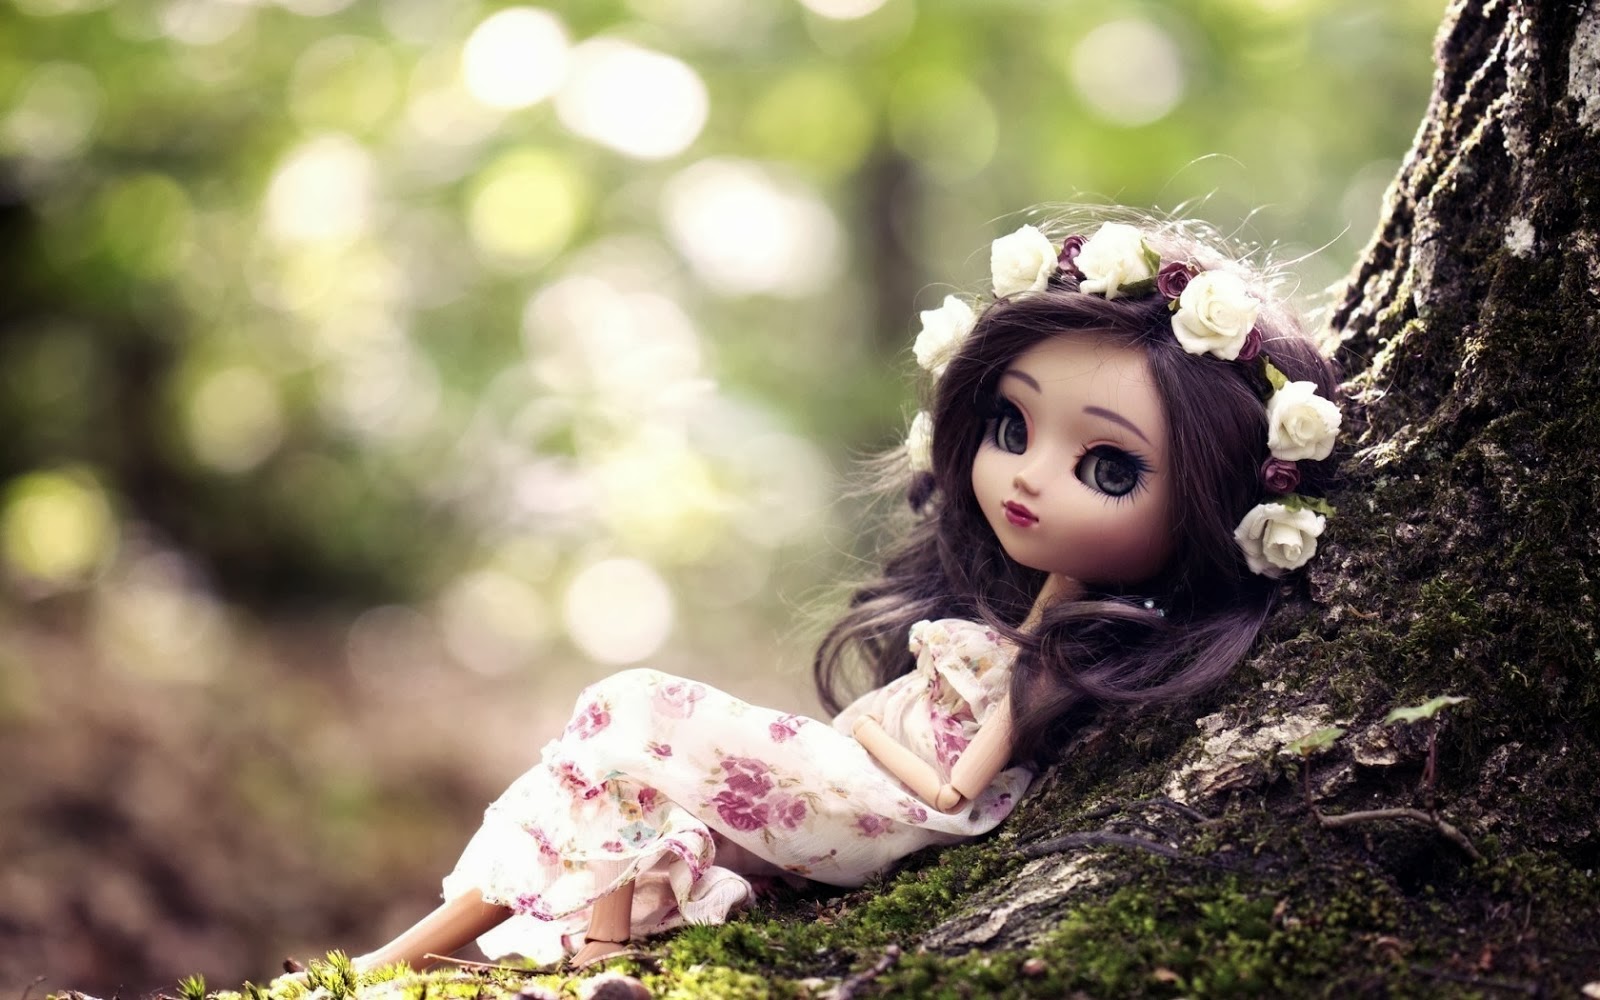 Related To Cute Dolls Wallpaper Wallpaperzz